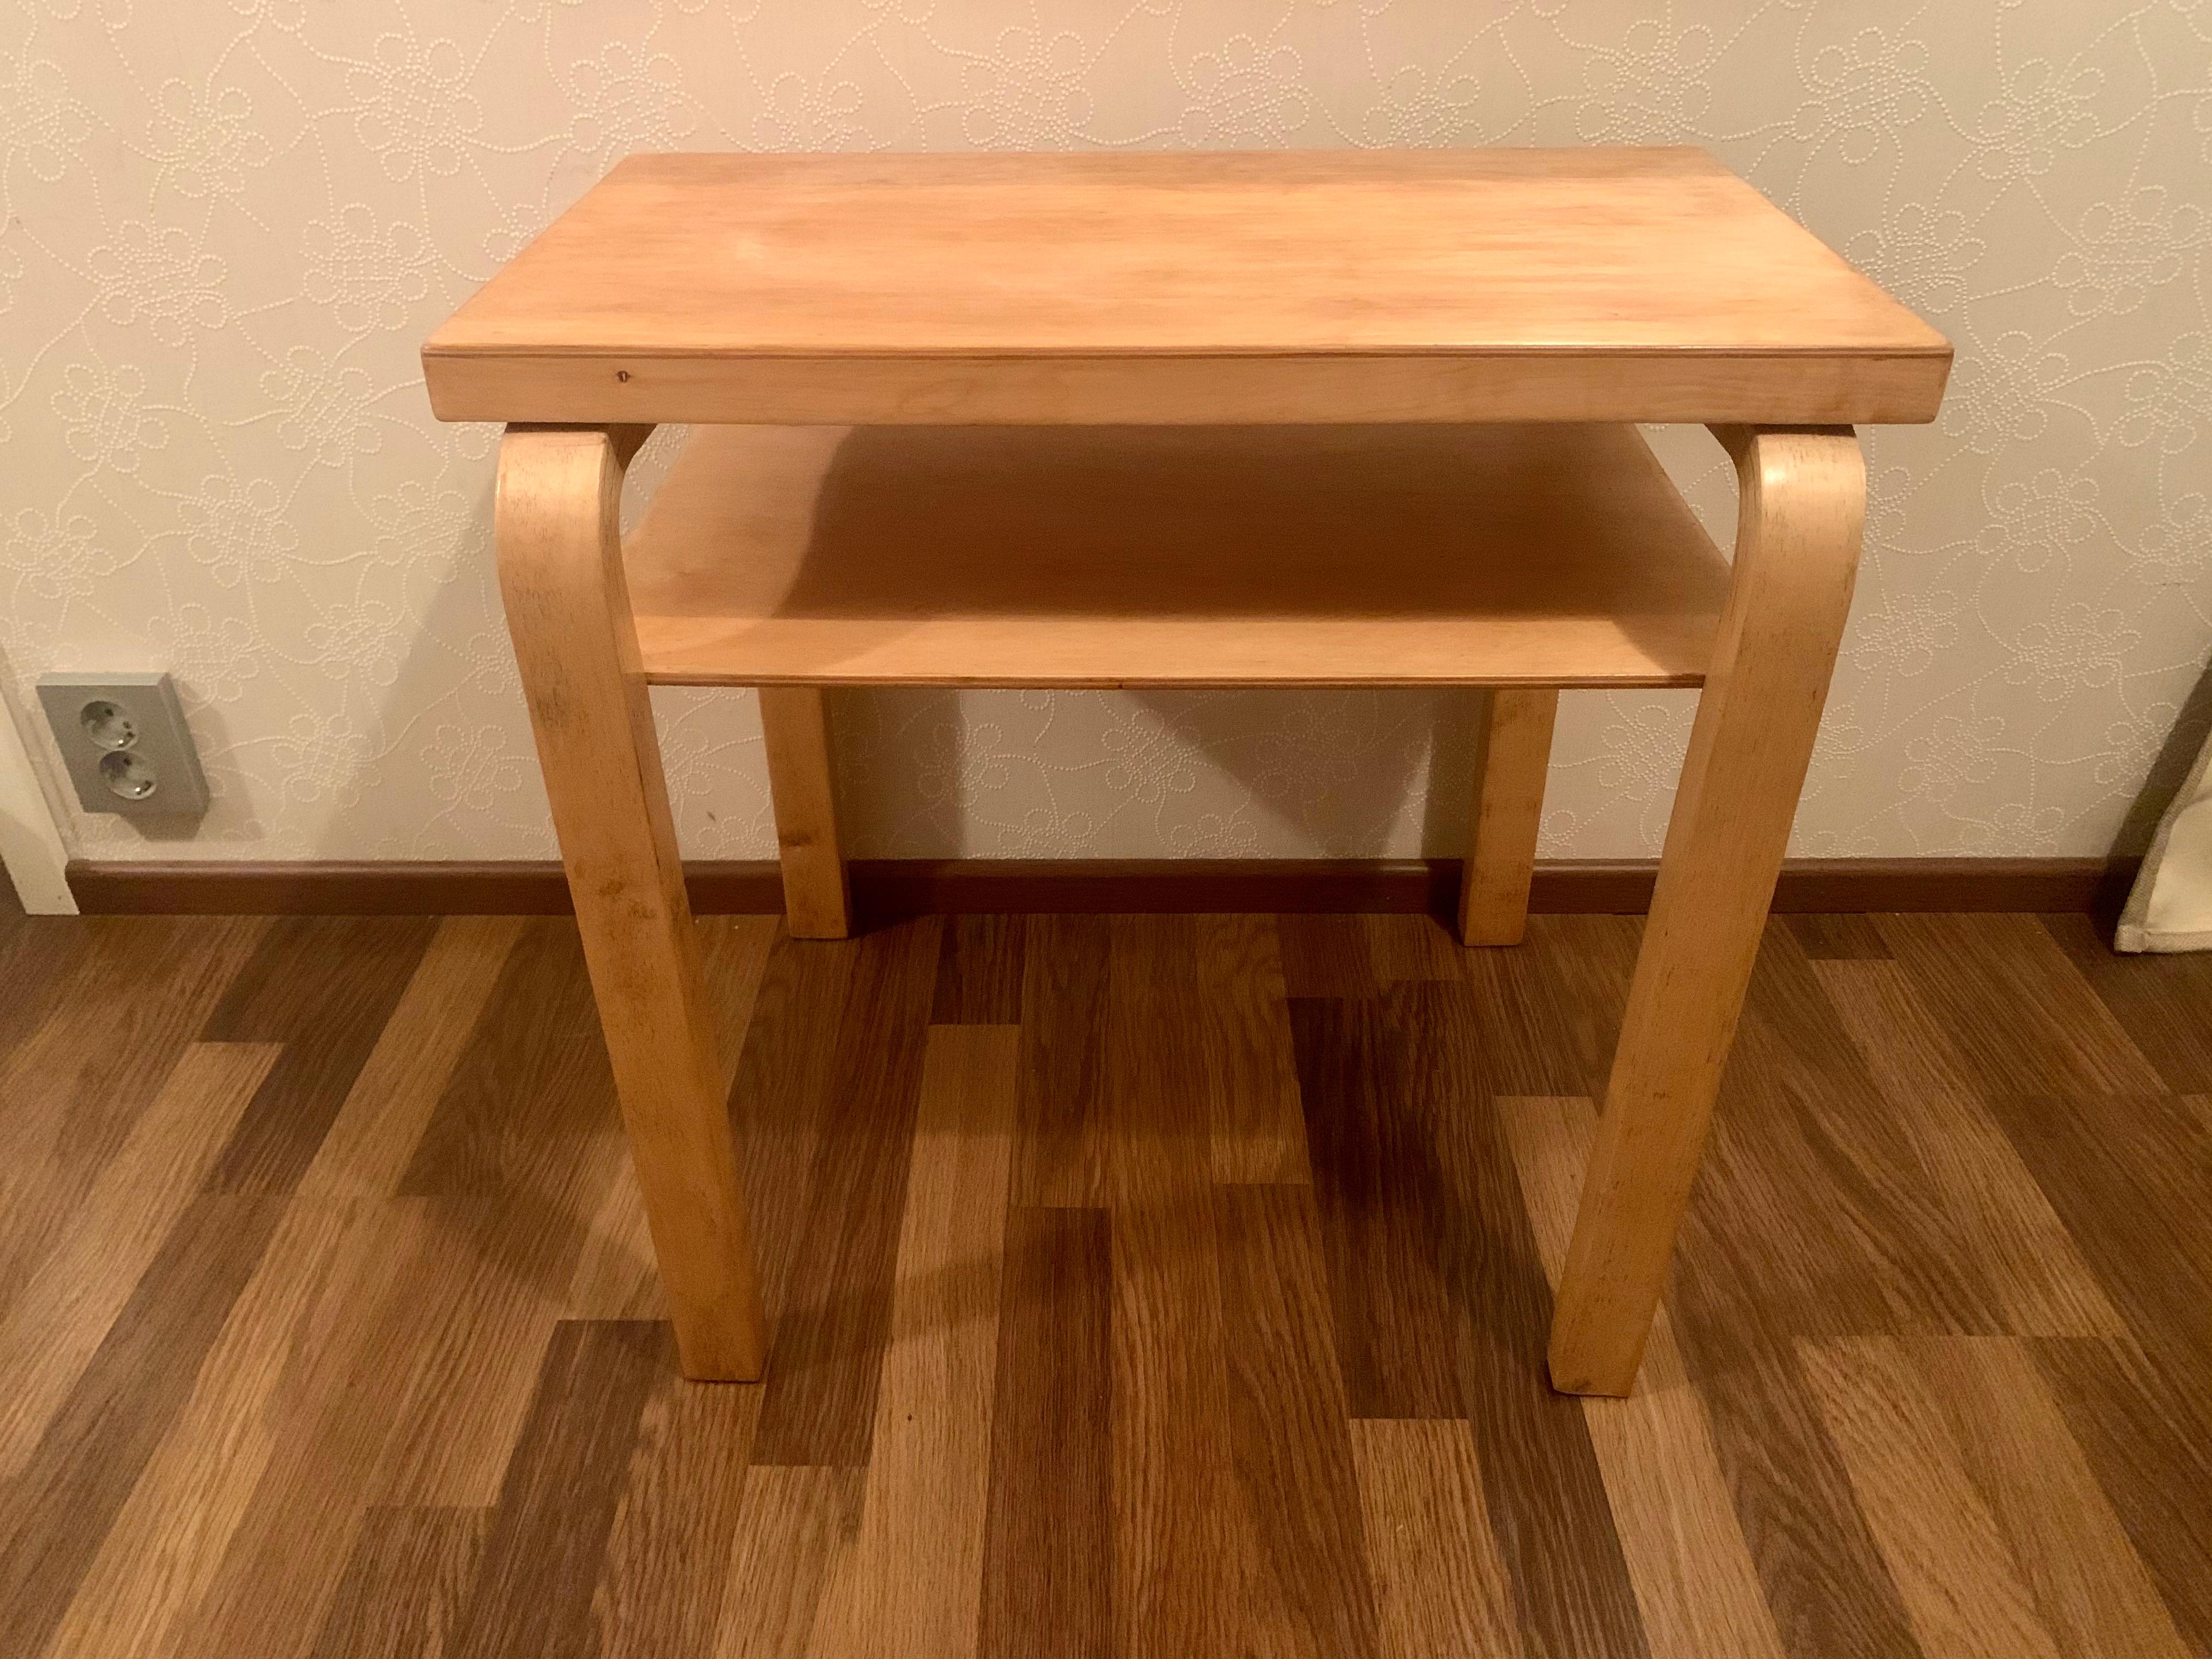 Woodwork Radio Table, Designed by Alvar Aalto', Made in Finland For Sale